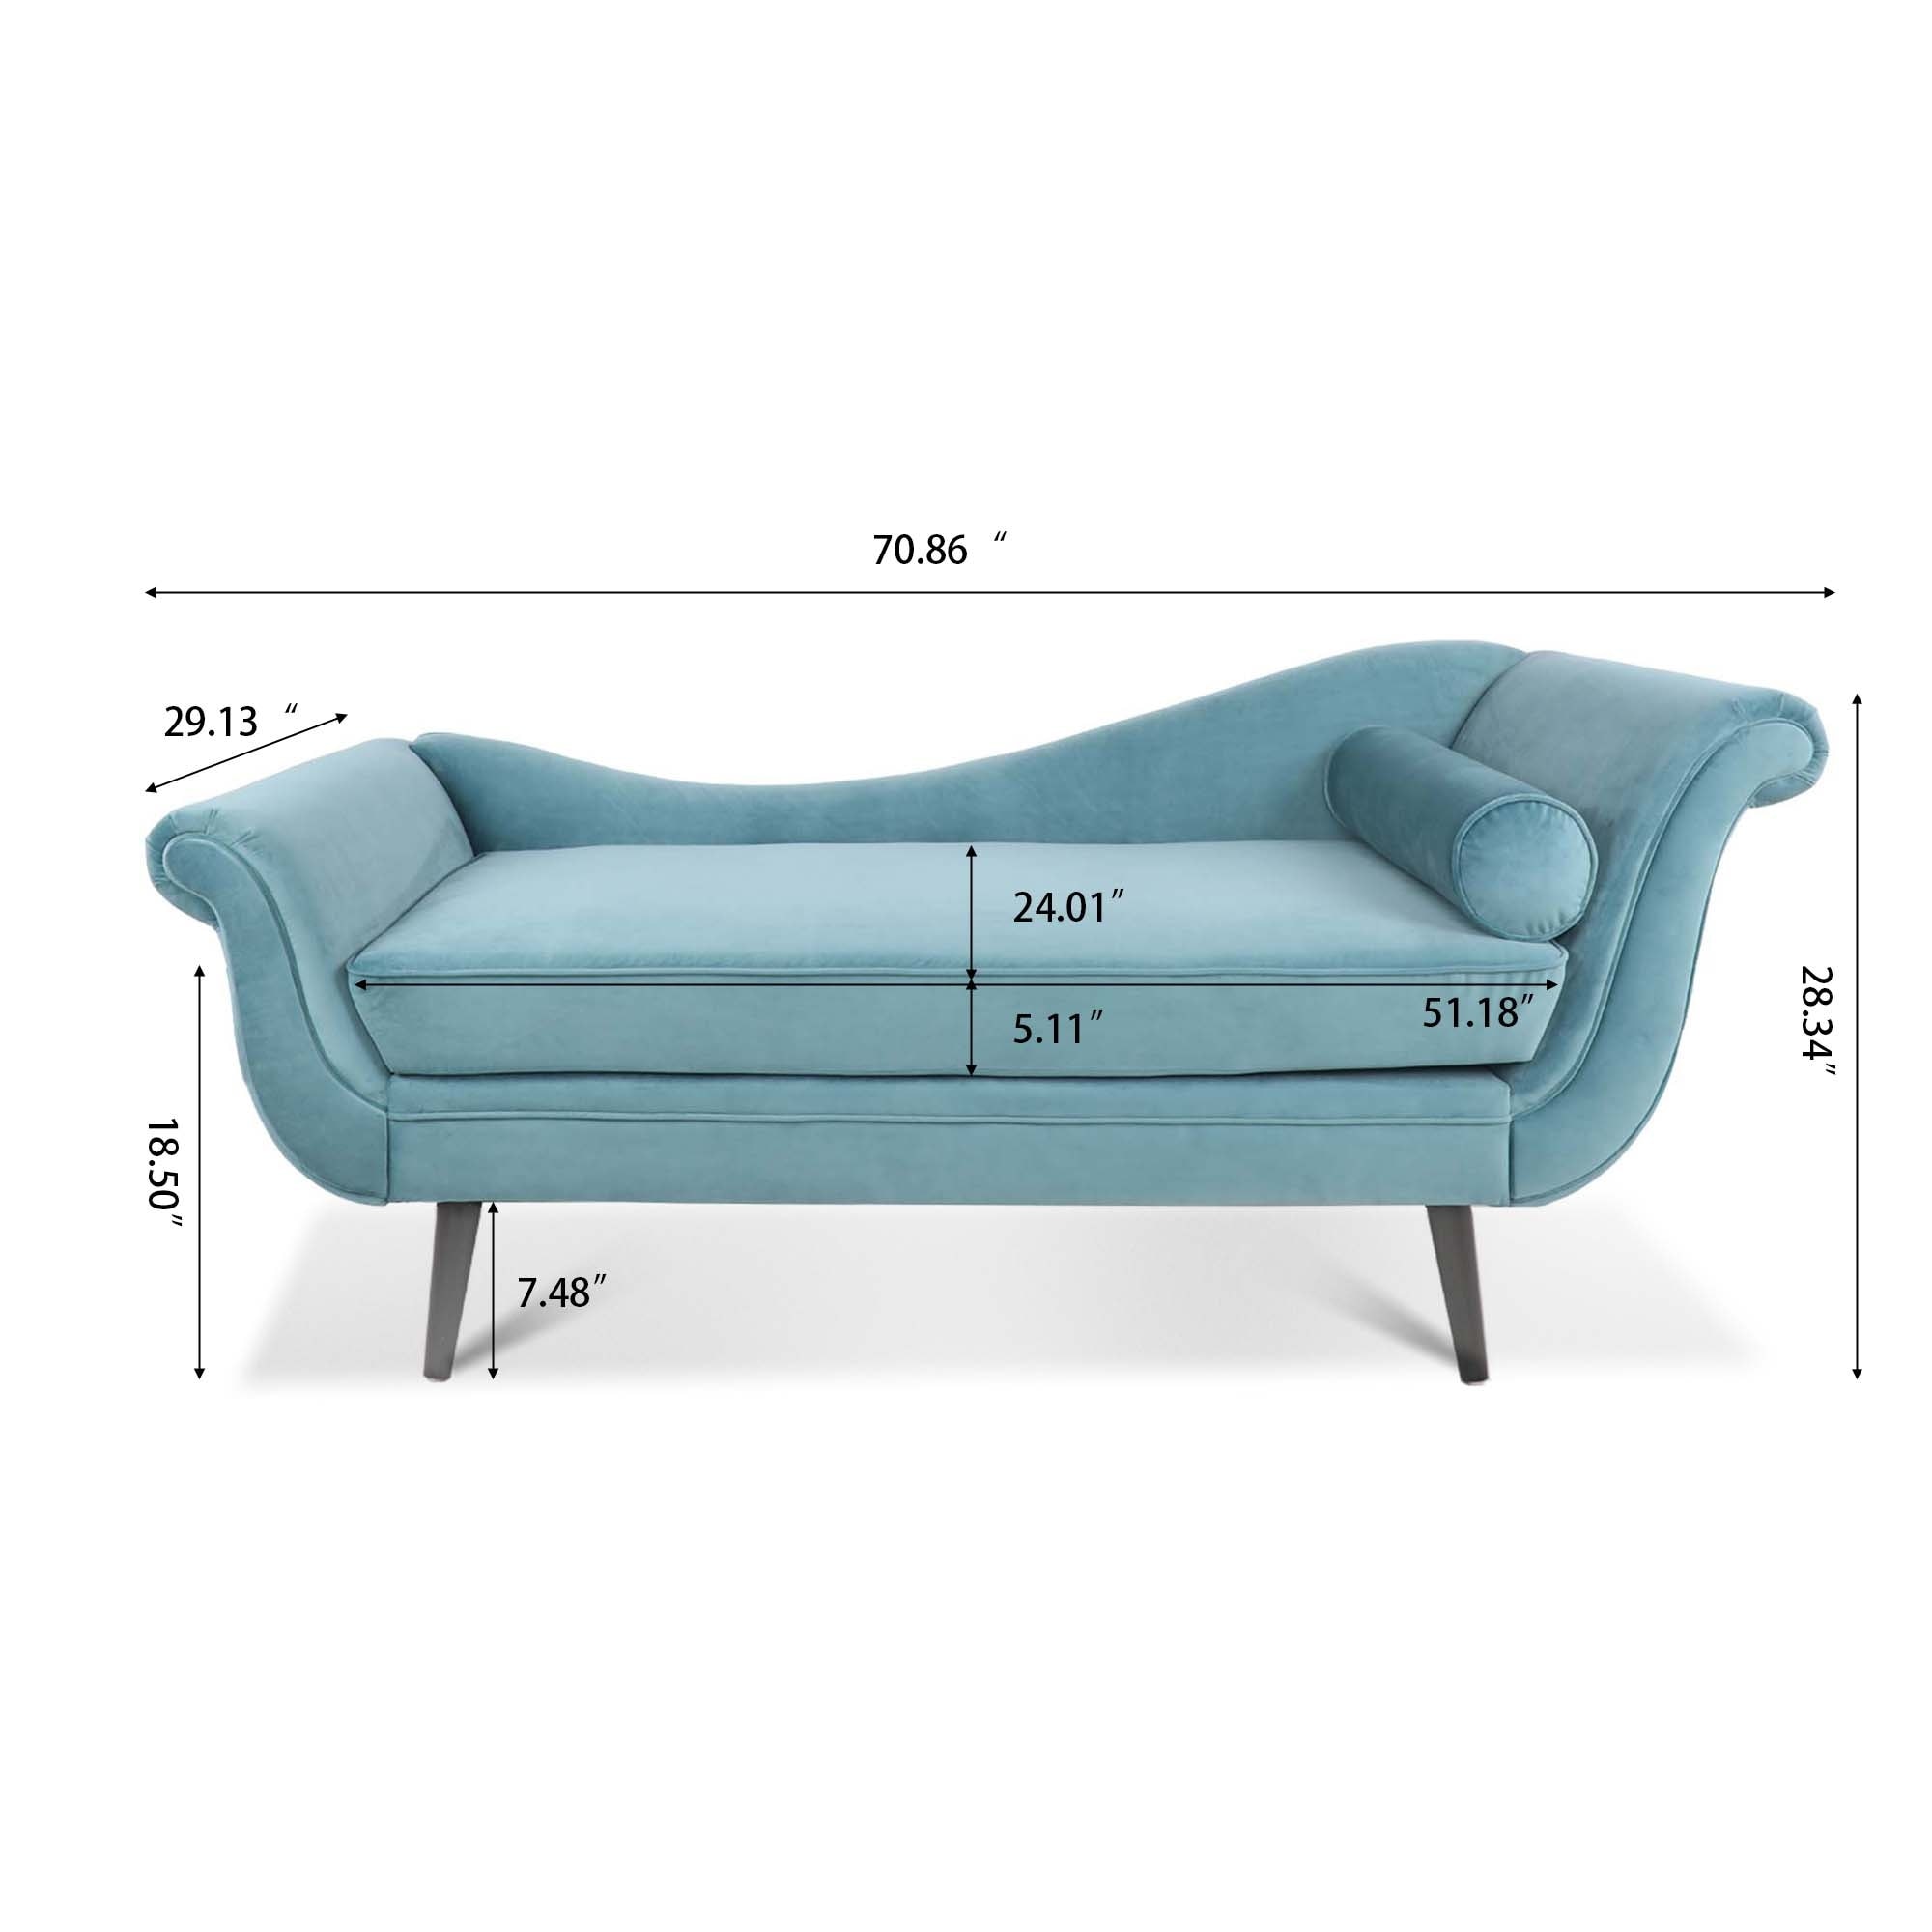 Contemporary Chaise Lounge with Concave Back and Reel Arm Design